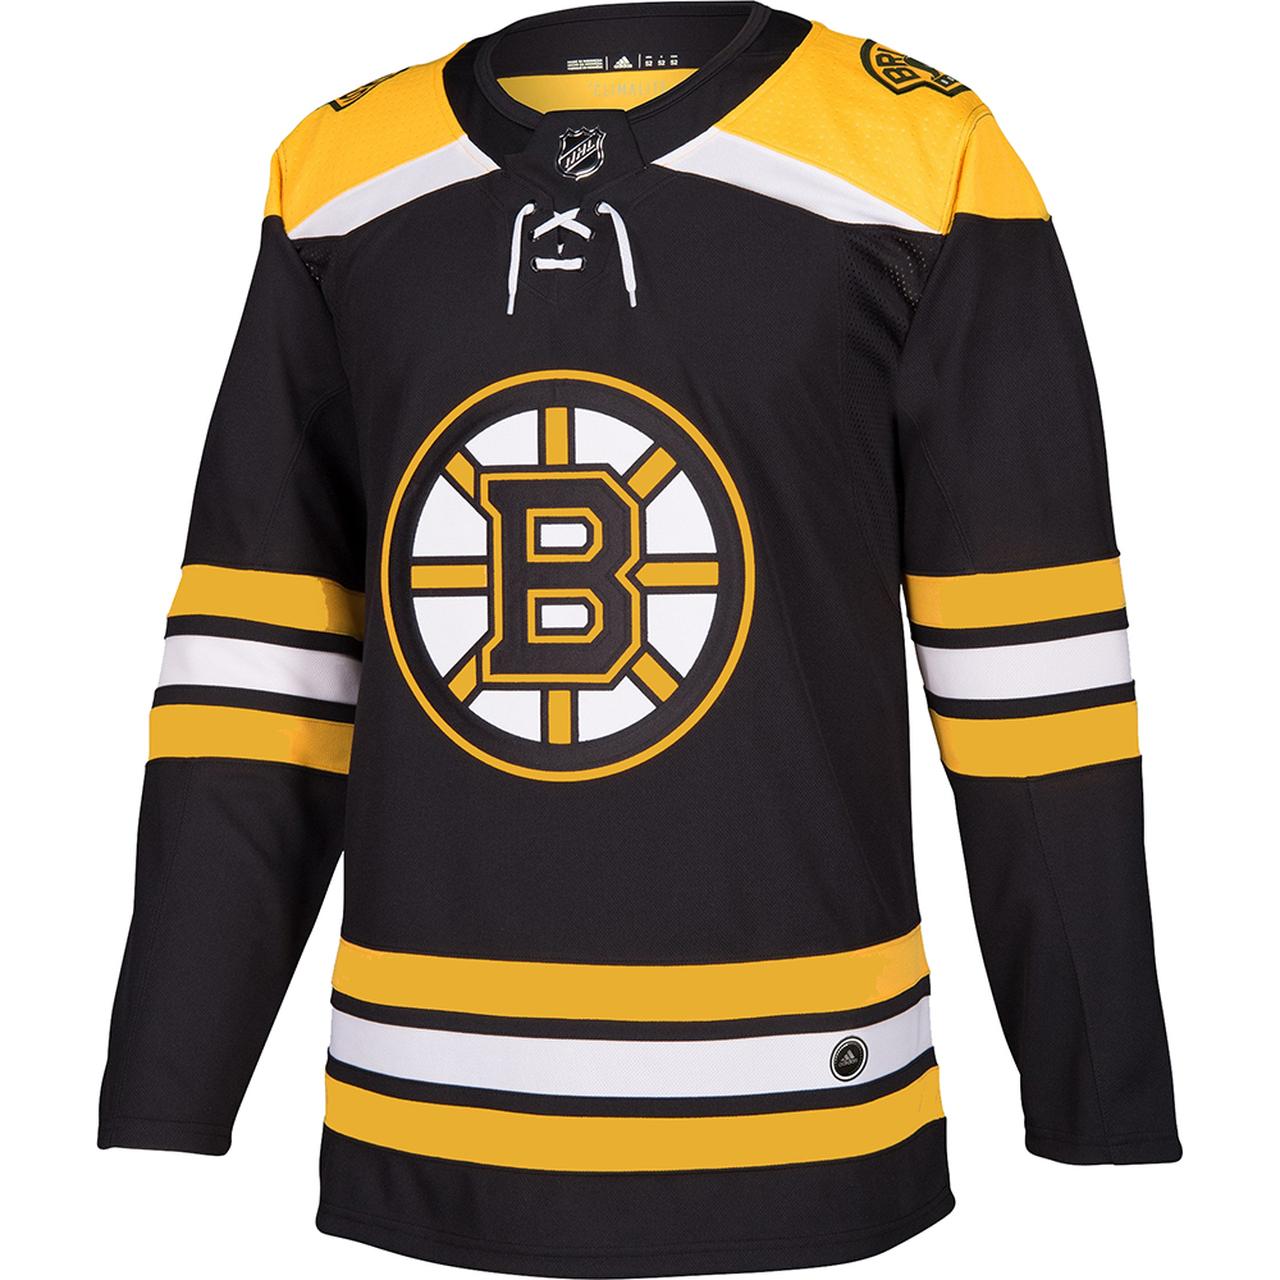 adidas Authentic NHL Pro Hockey Jersey Deals